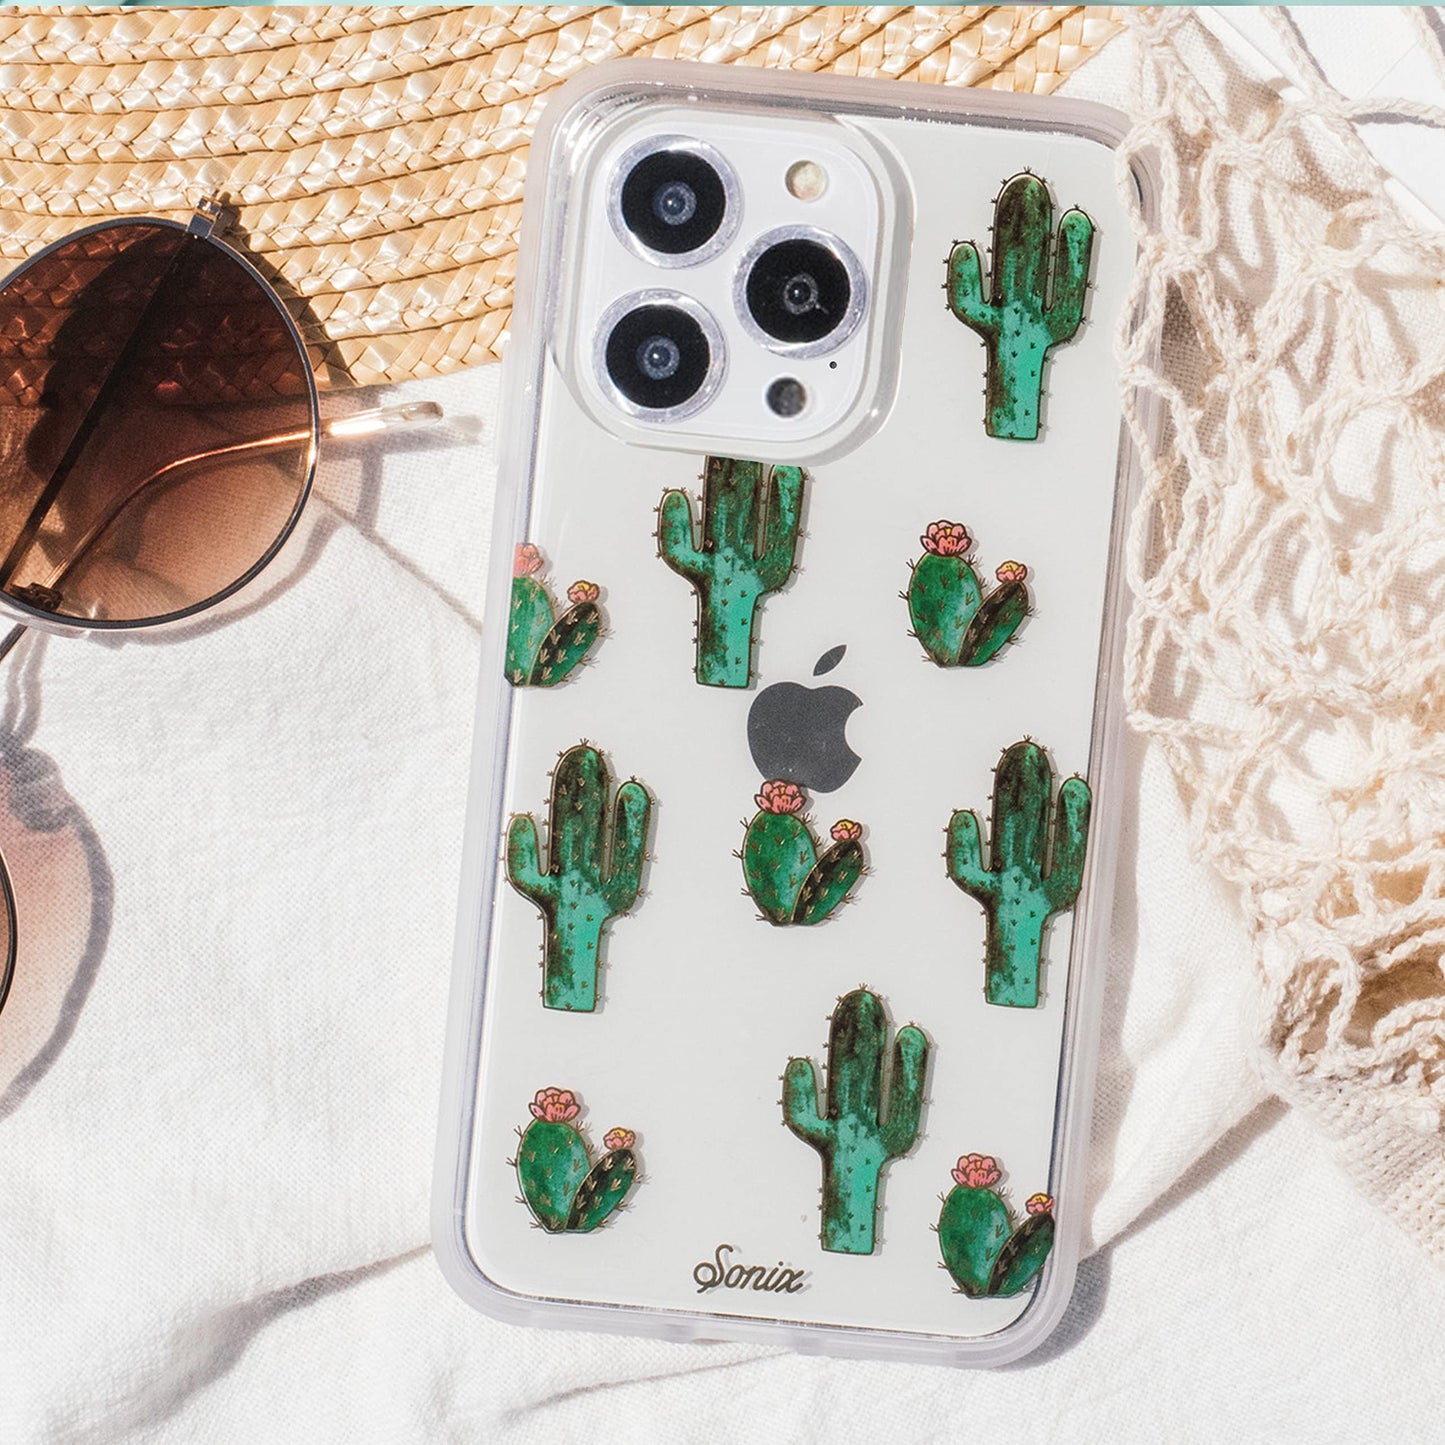 Sonix Phone Case for iPhone 13 Pro | 10ft Drop Tested | Cactus Print | Prickly Pear